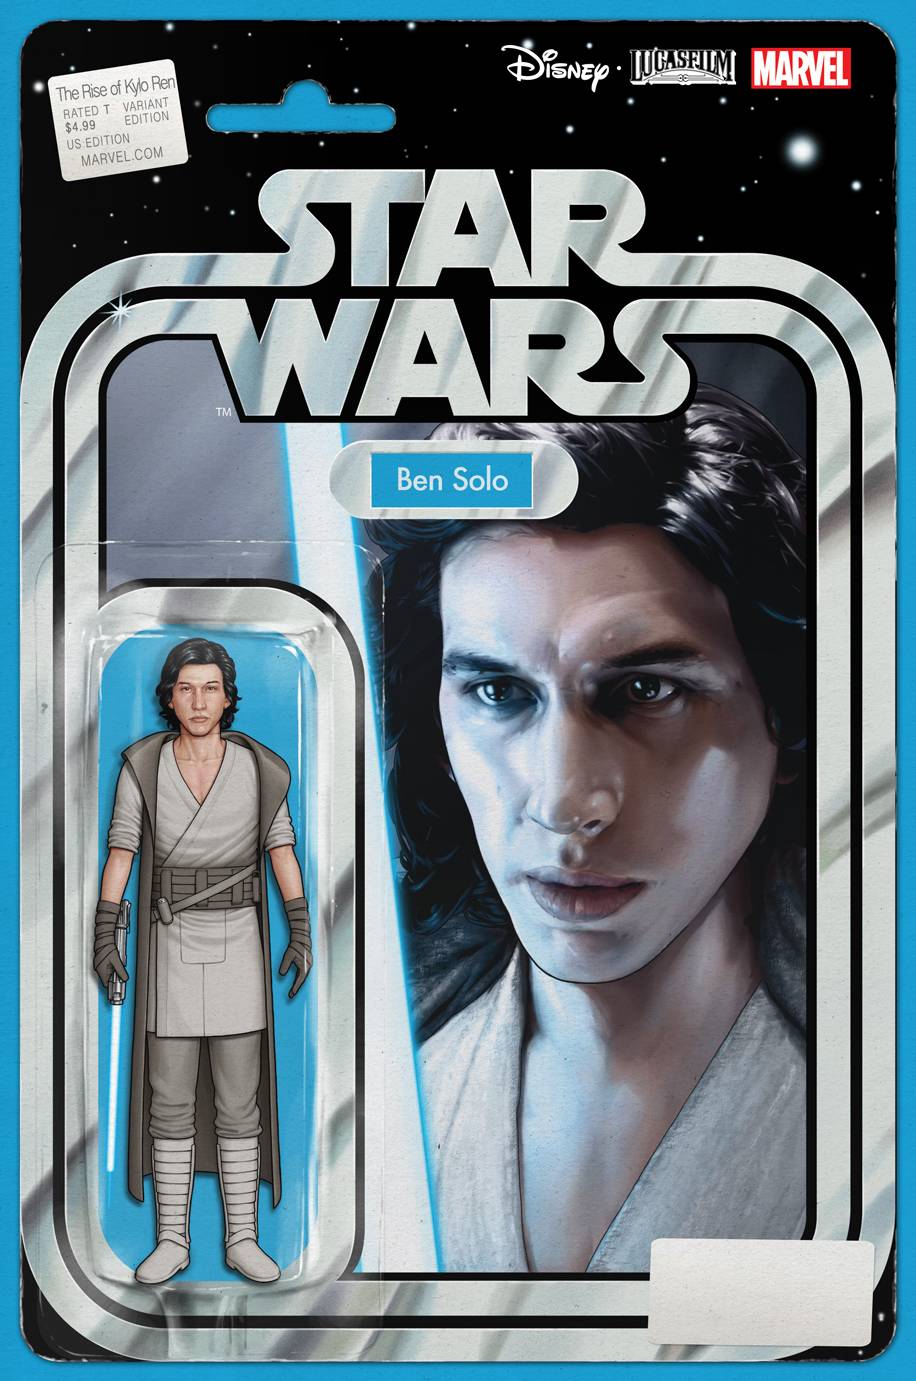 STAR WARS RISE KYLO REN #1 (OF 4) CHRISTOPHER ACTION FIGURE